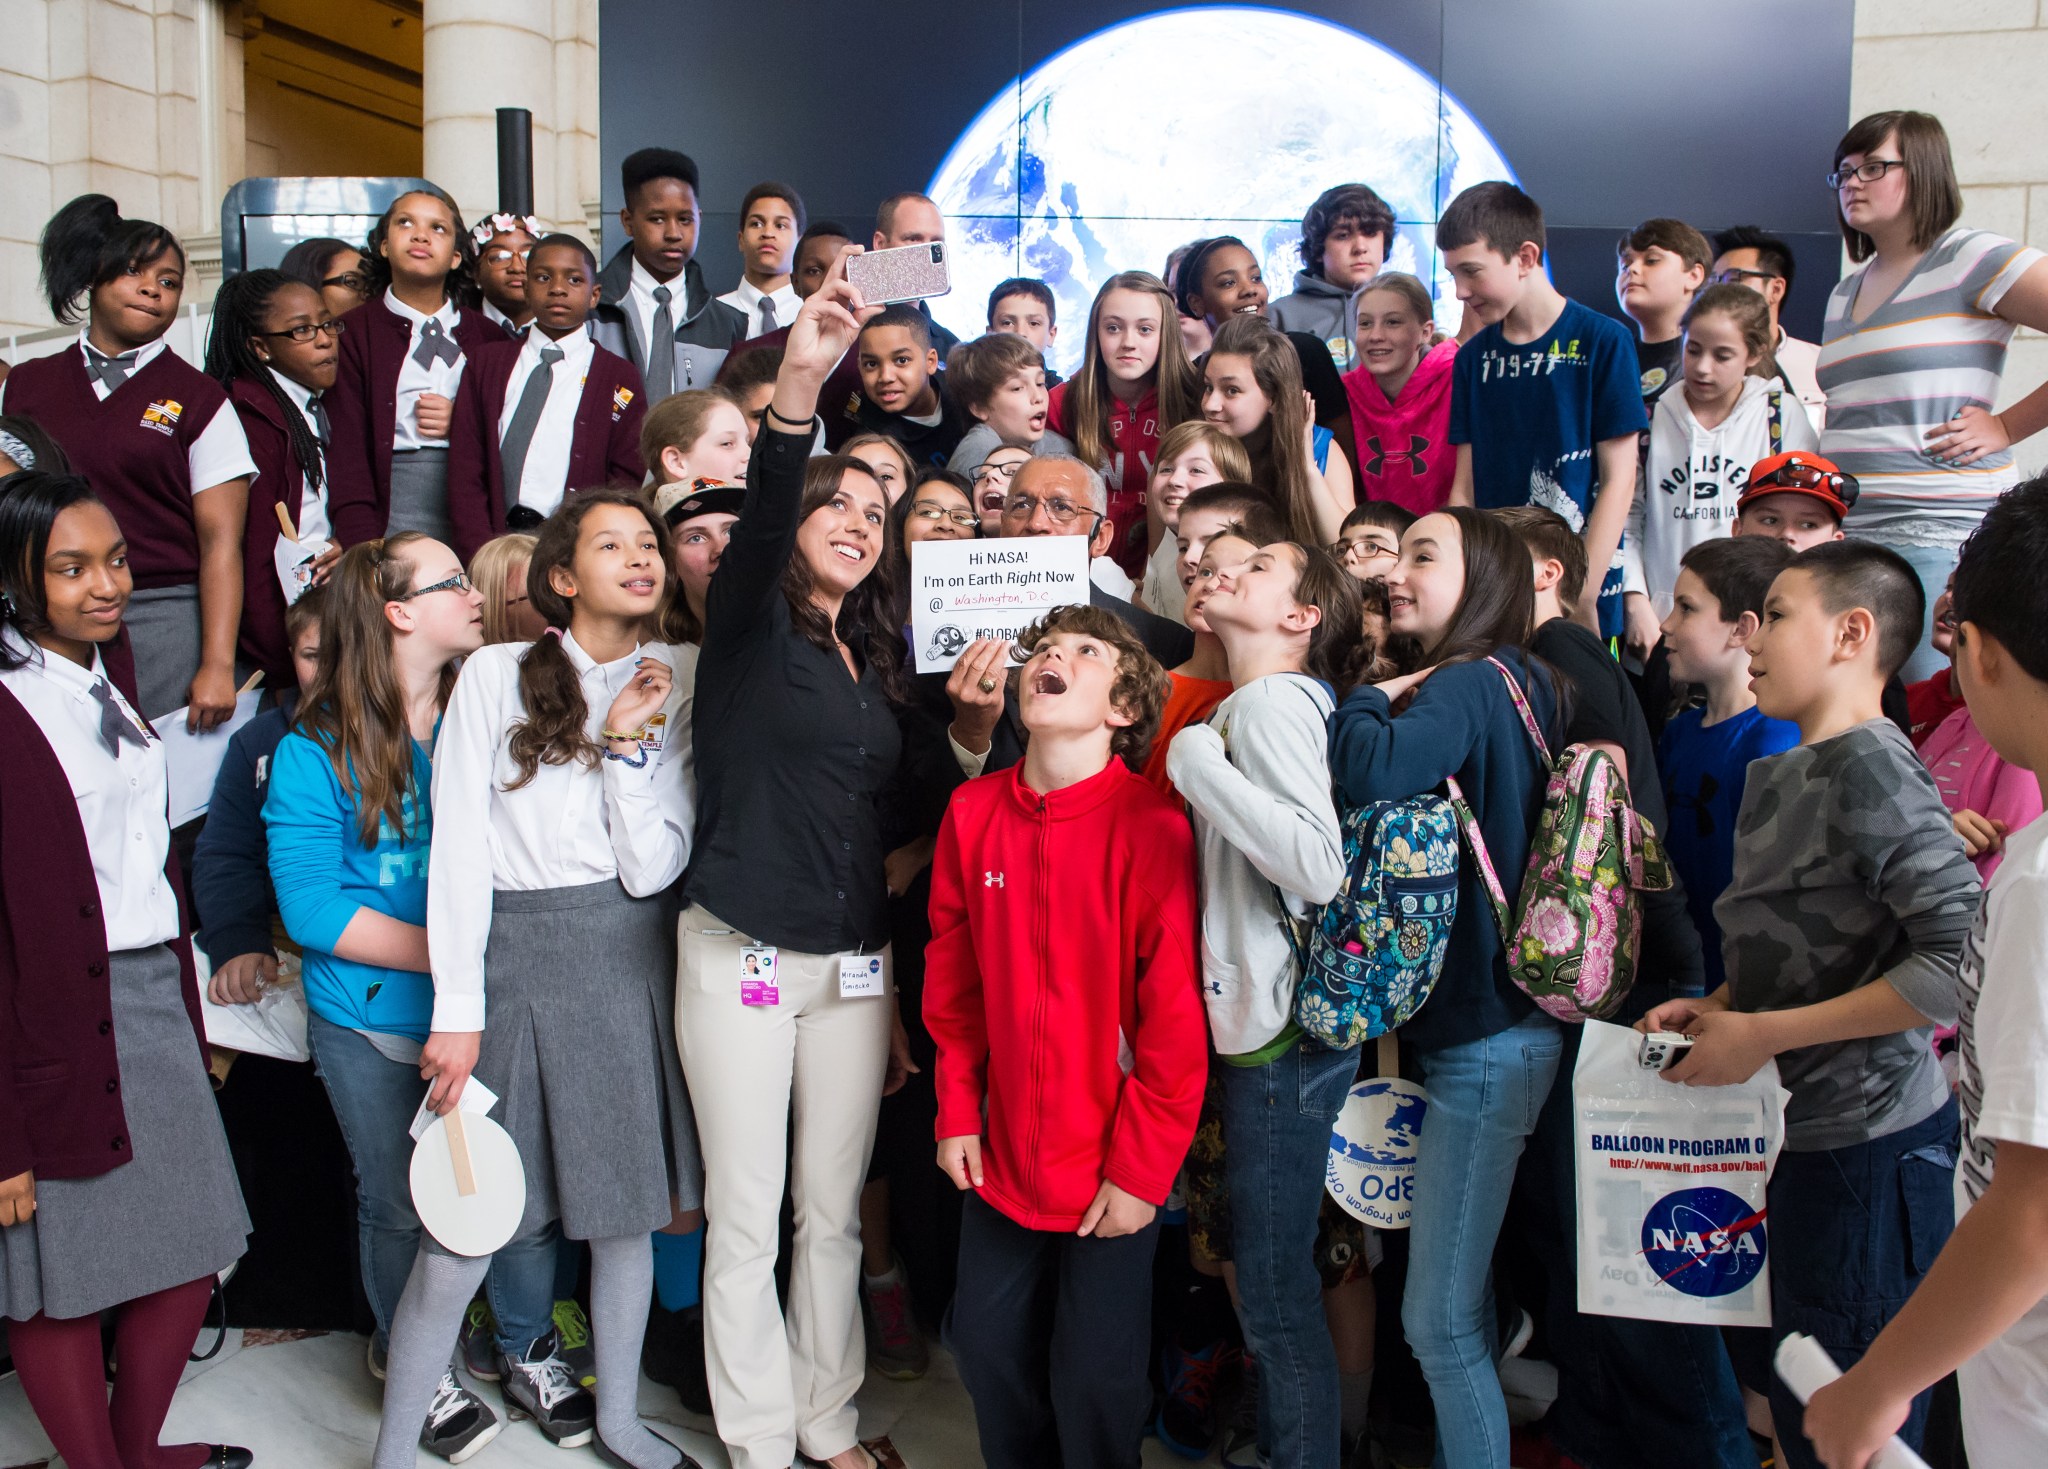 NASA Administrator Charles Bolden poses for a quick selfie with students who attended the NASA sponsored Earth Day event.